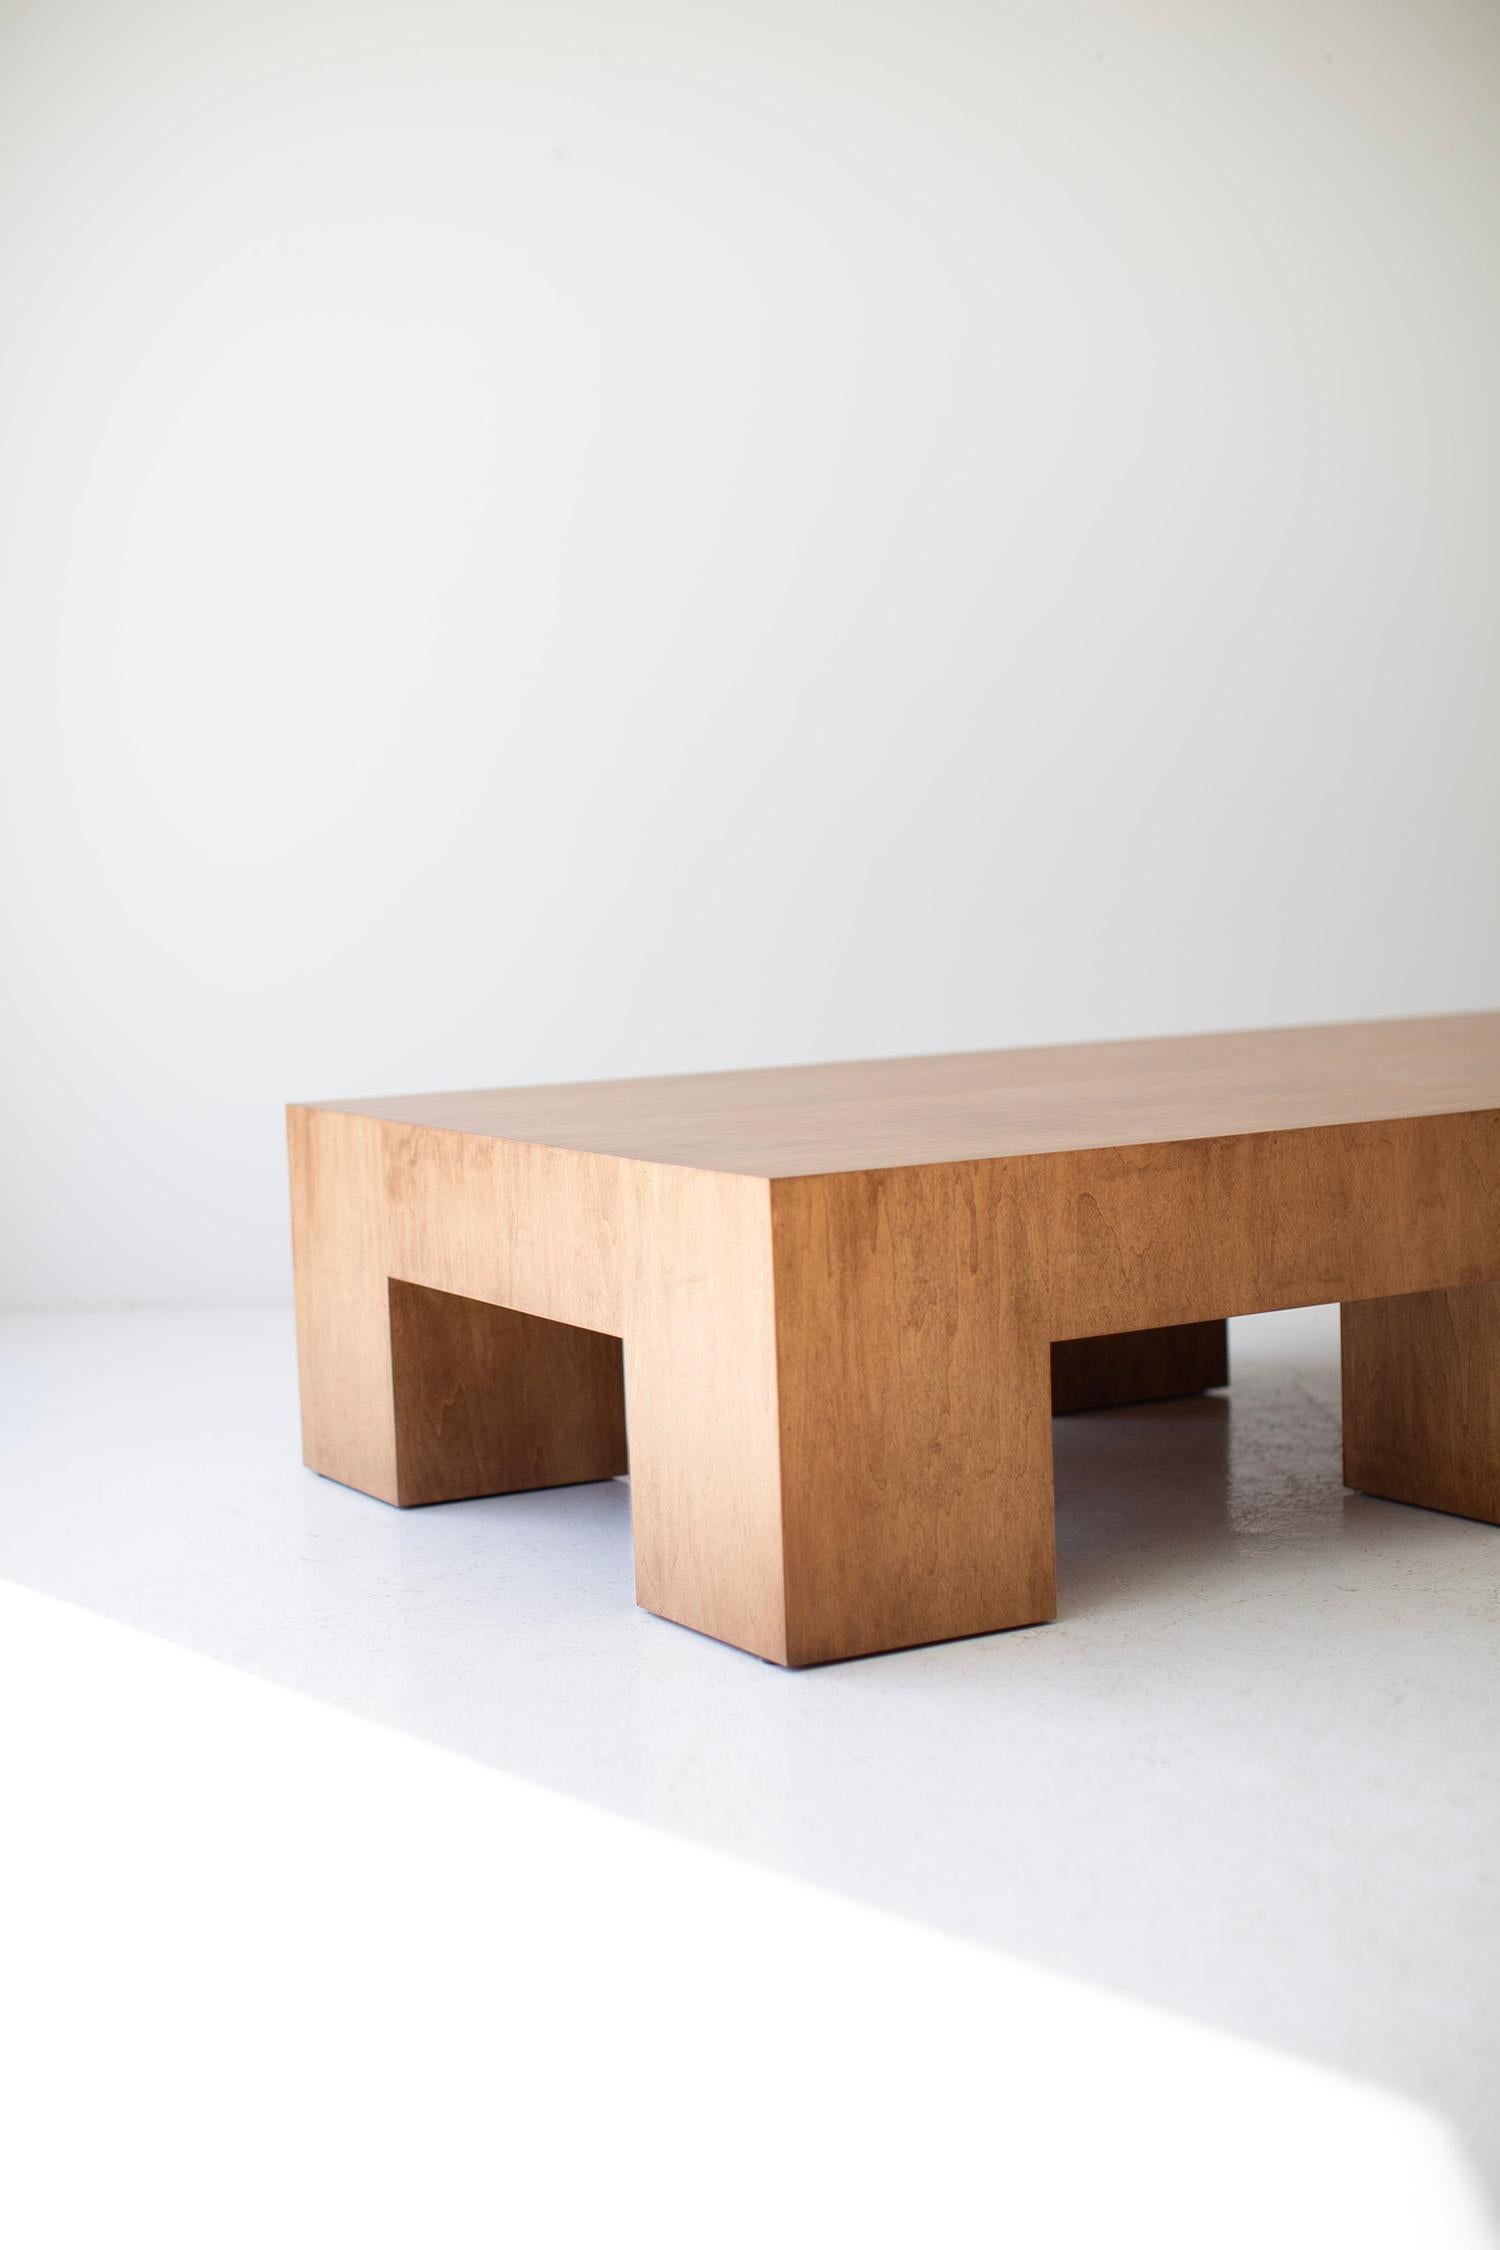 Bertu Coffee Table, Large Modern Coffee Table, Maple Veneer, Mondo

This Large Modern Coffee Table - The Mondo is made in the heart of Ohio with locally sourced wood. Each table is hand-made with mitered corners from white oak or maple veneer and